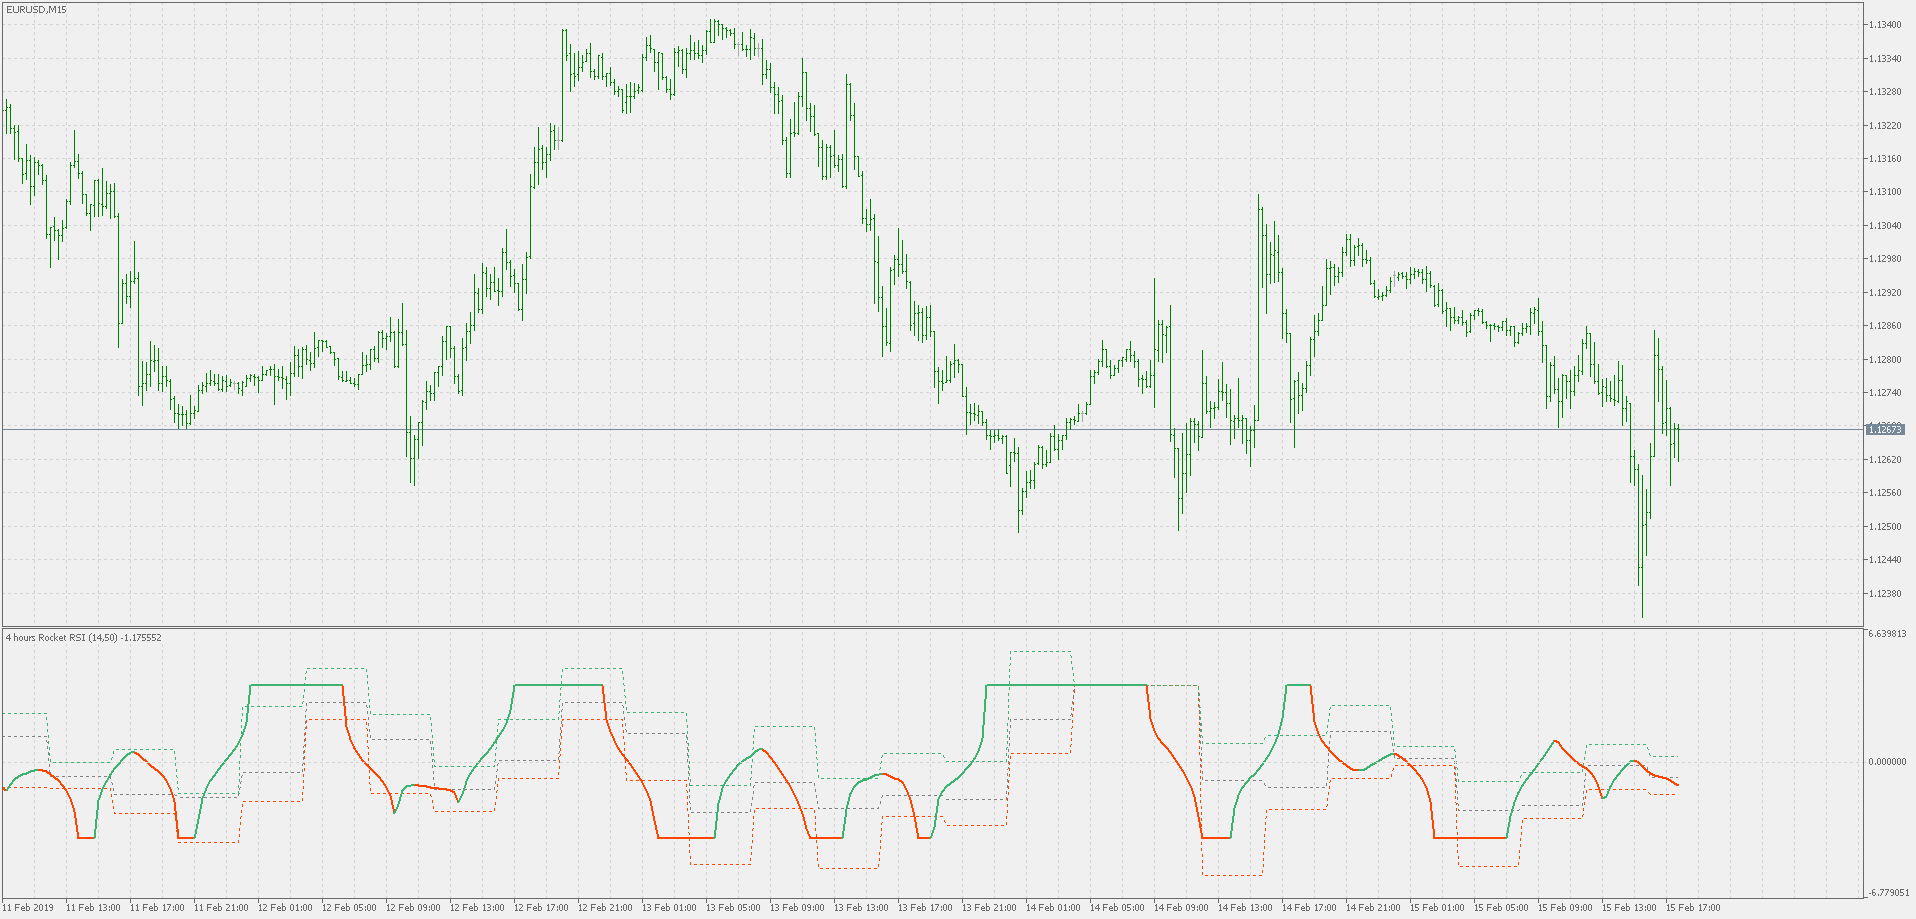 Free download of the 'Rocket RSI pivots' indicator by ...